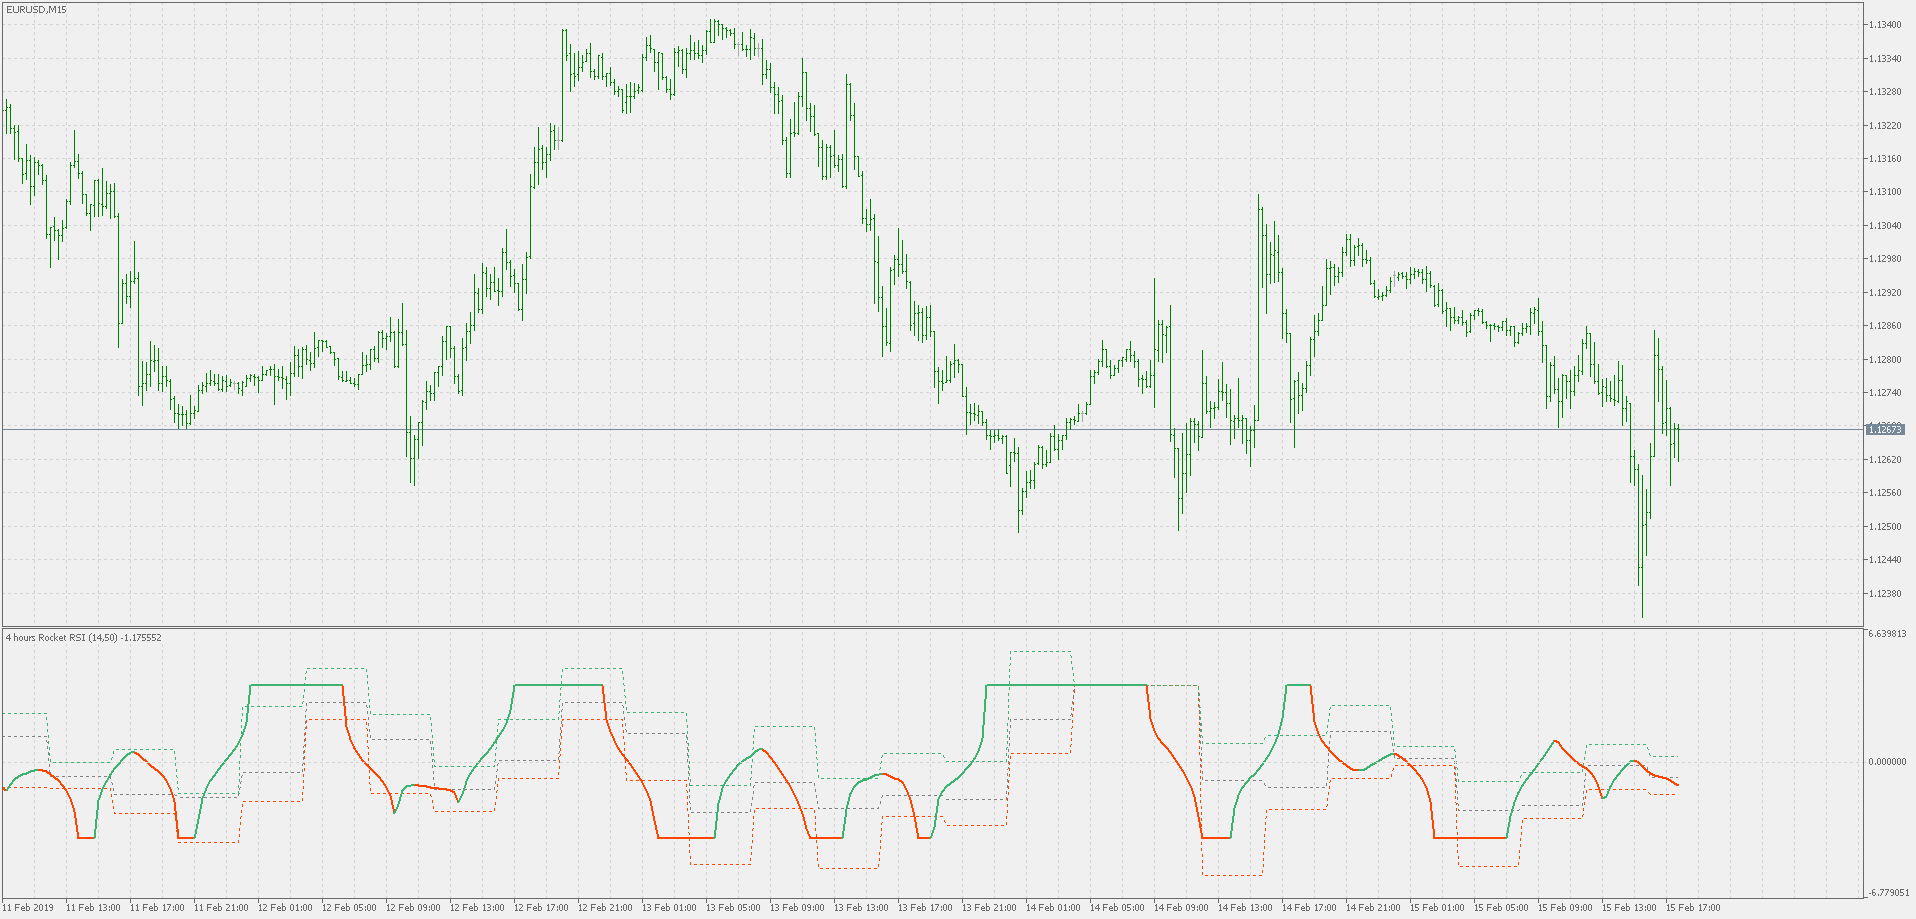 Free download of the 'Rocket RSI pivots' indicator by ...